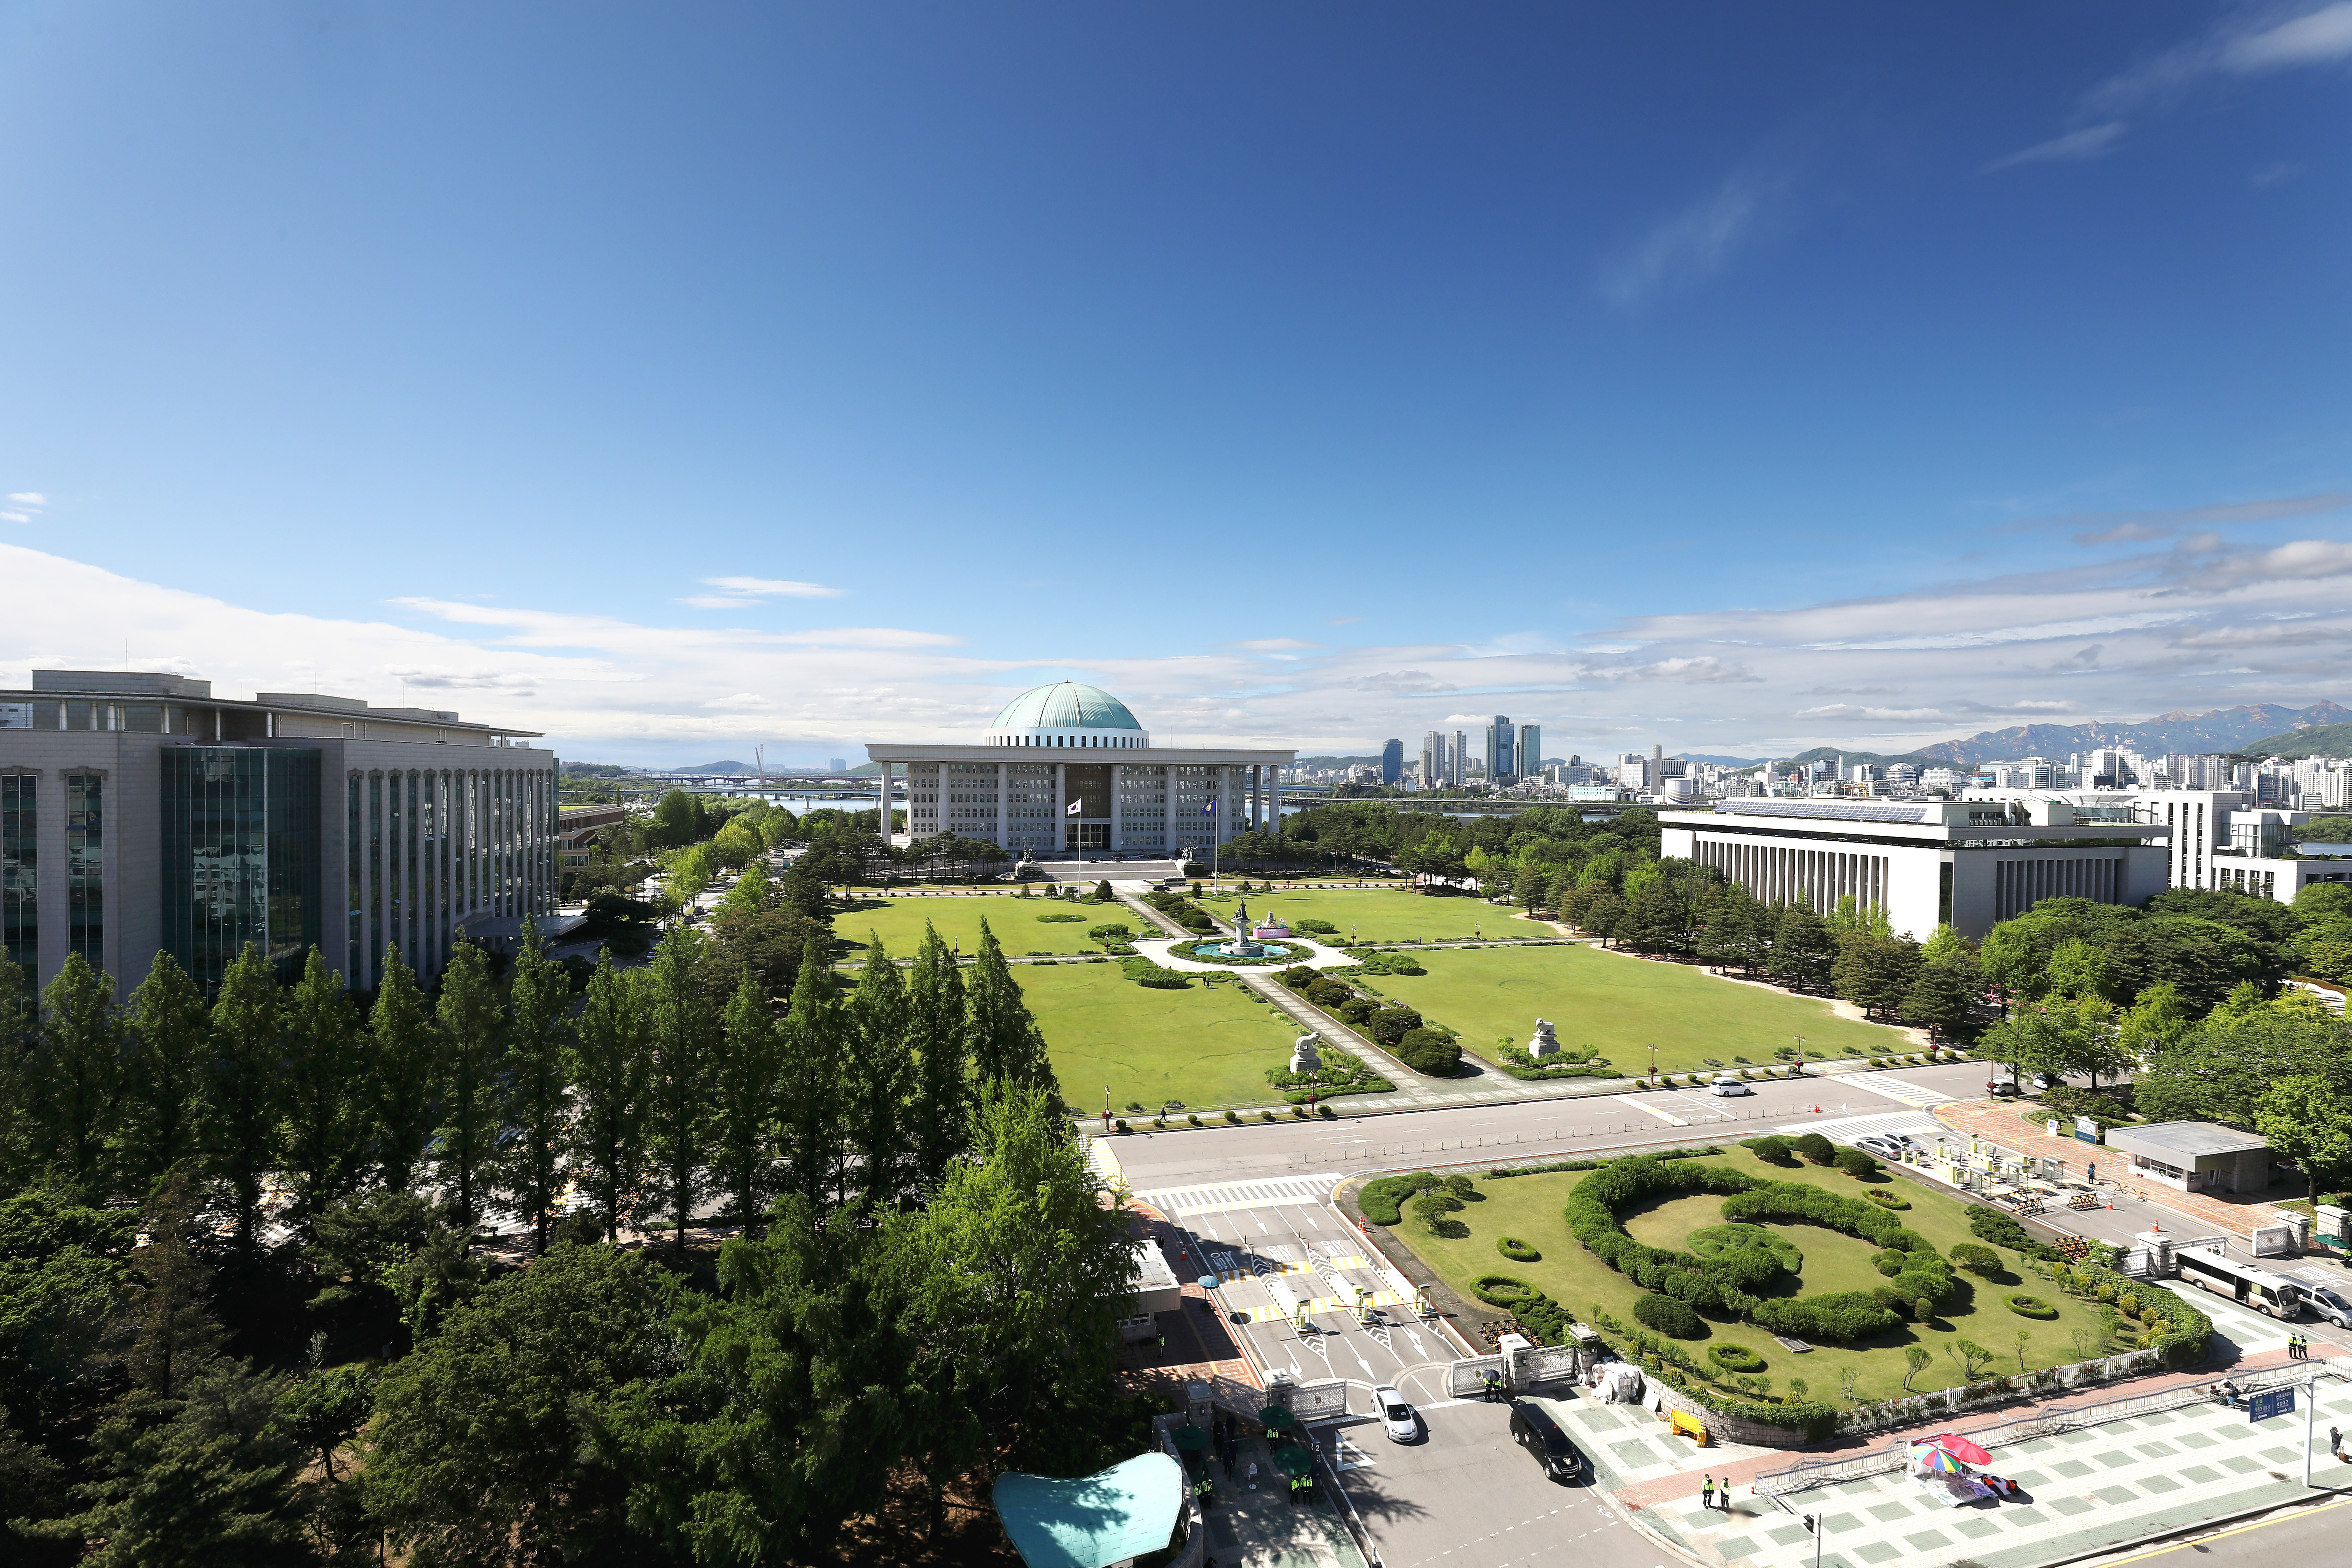 View of the National Assembly Building 관련사진 2 보기